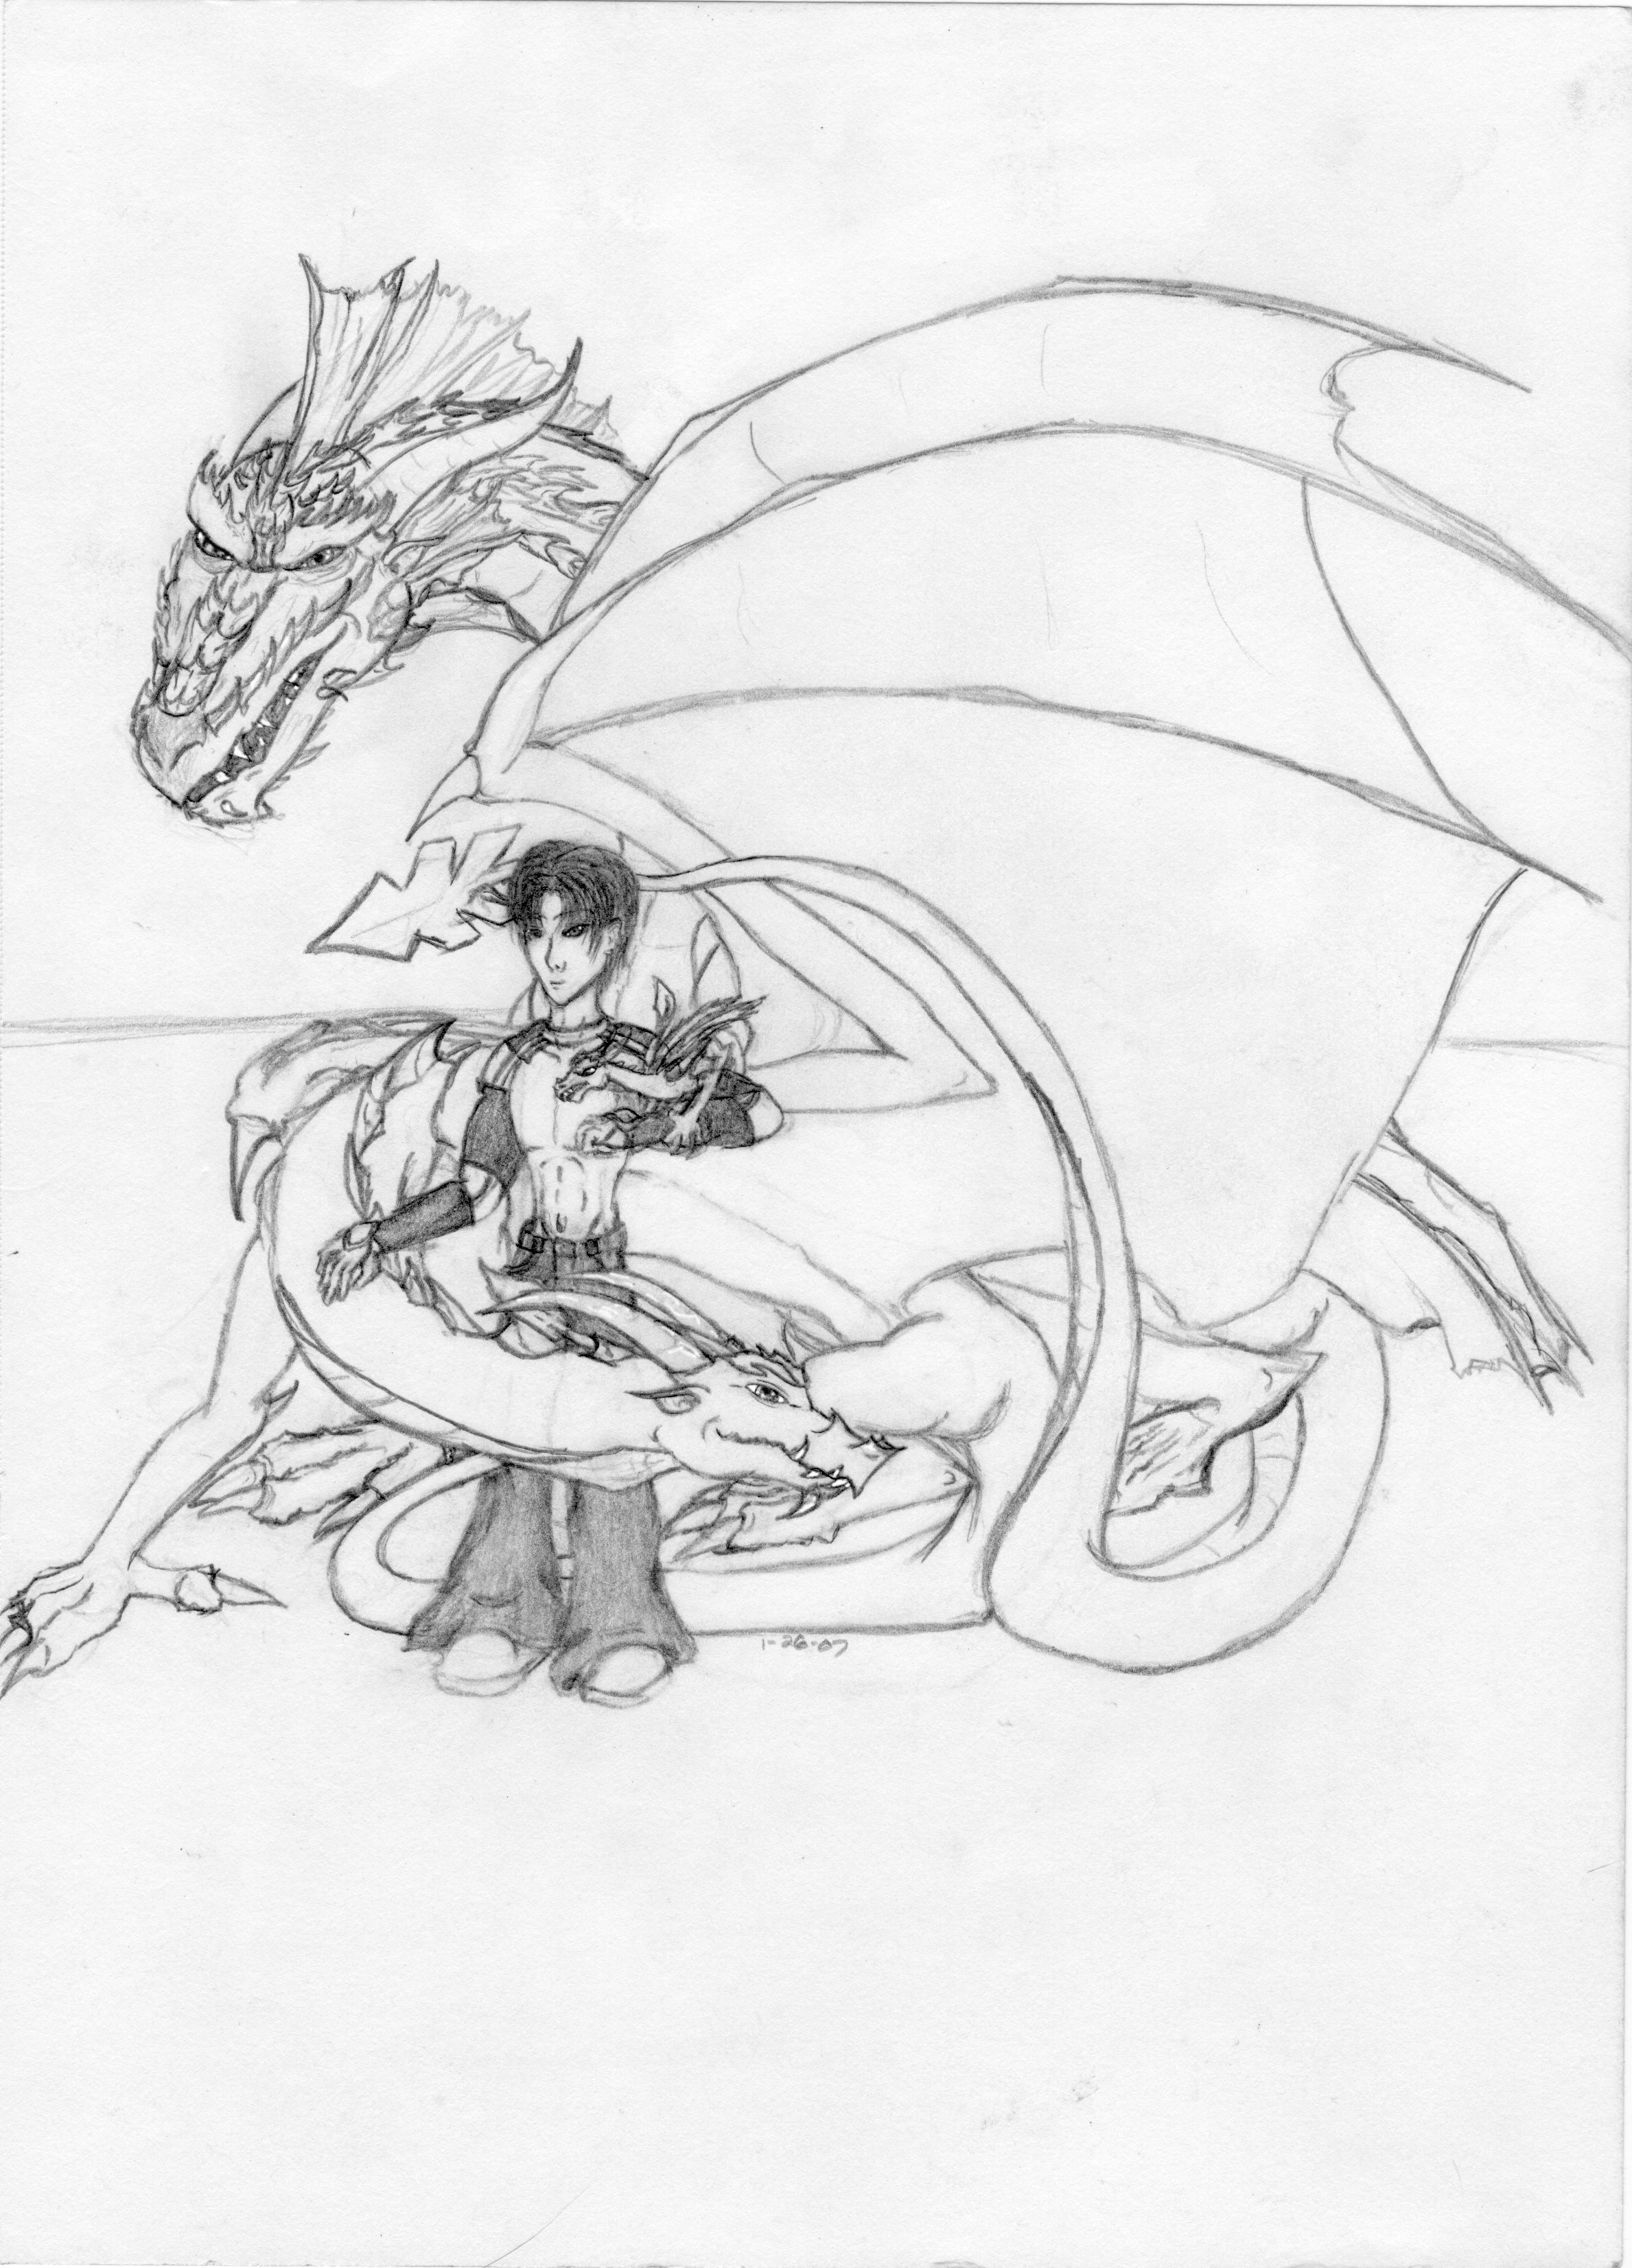 A Teen and His Dragons by GhostArt6